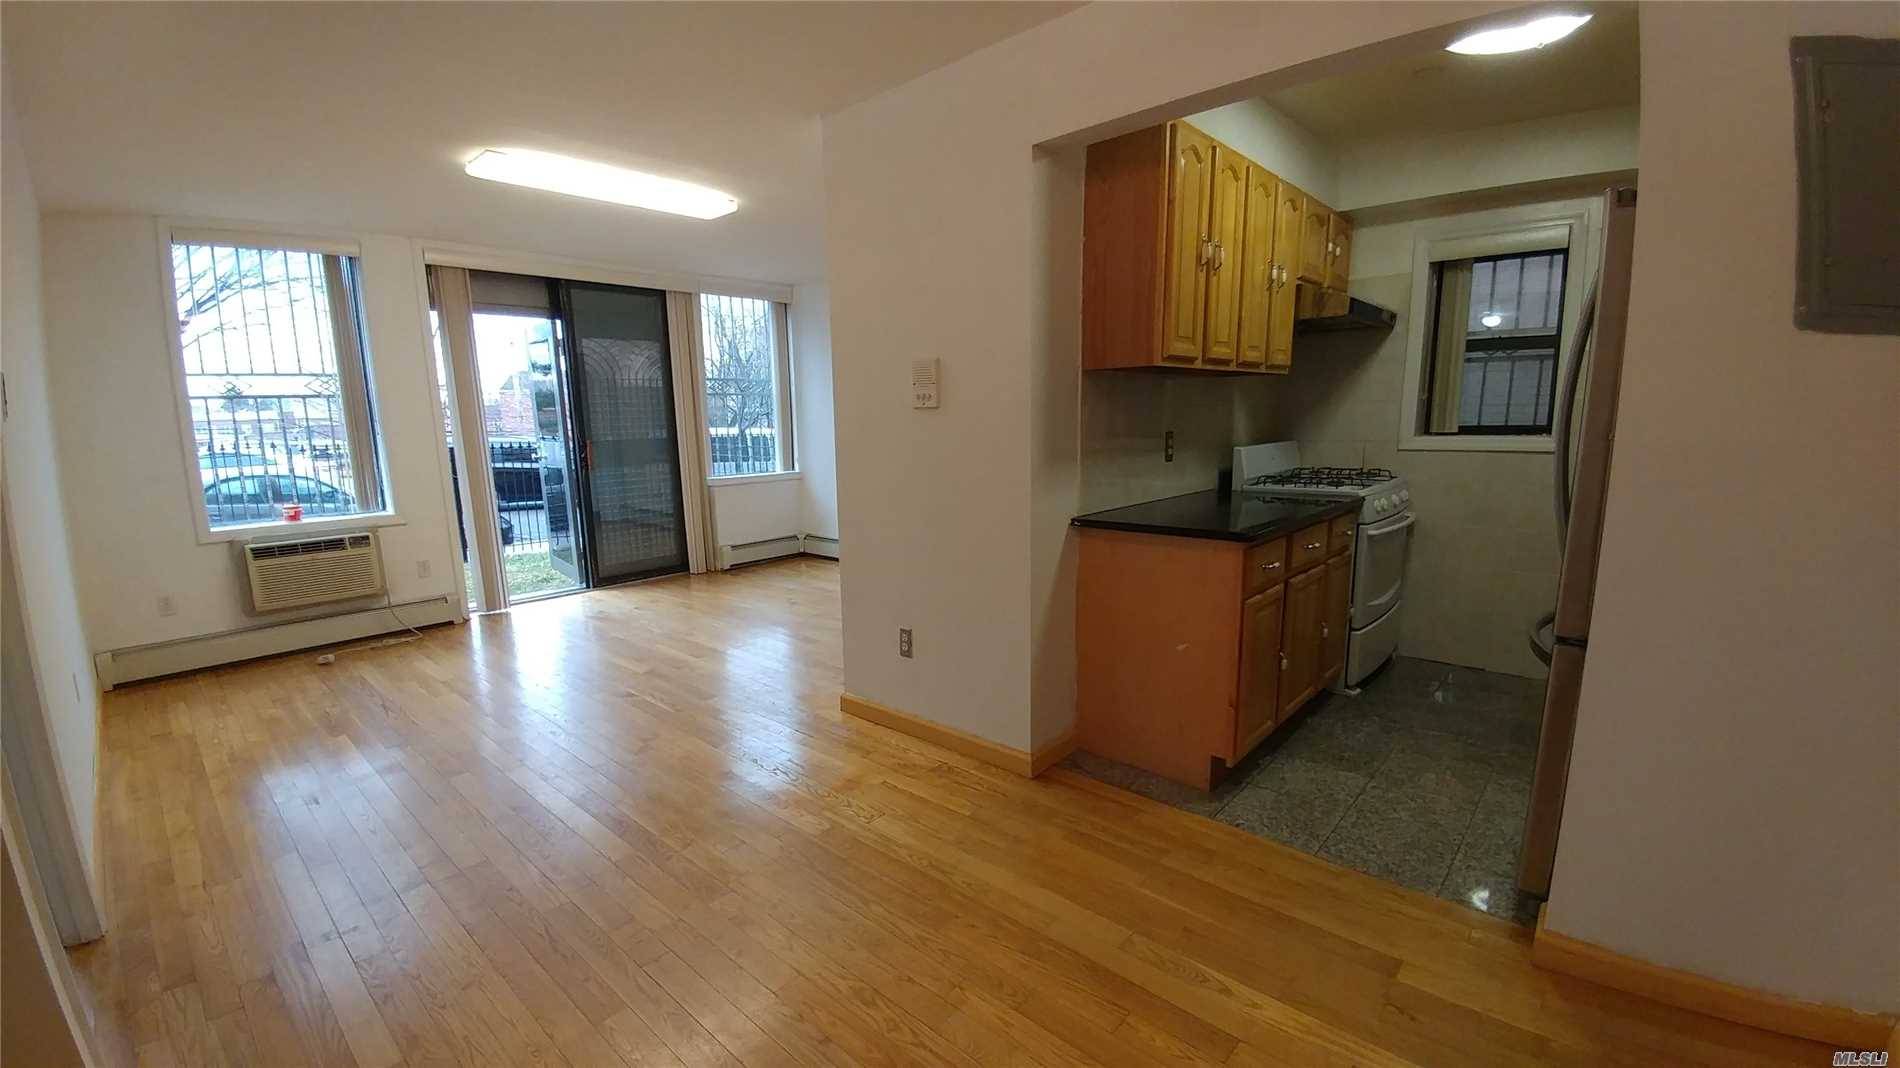 This Is A Wonderful One Bedroom Duplex With Separate Entrance For The Basement With Access To The Elevator And Parking Garage.